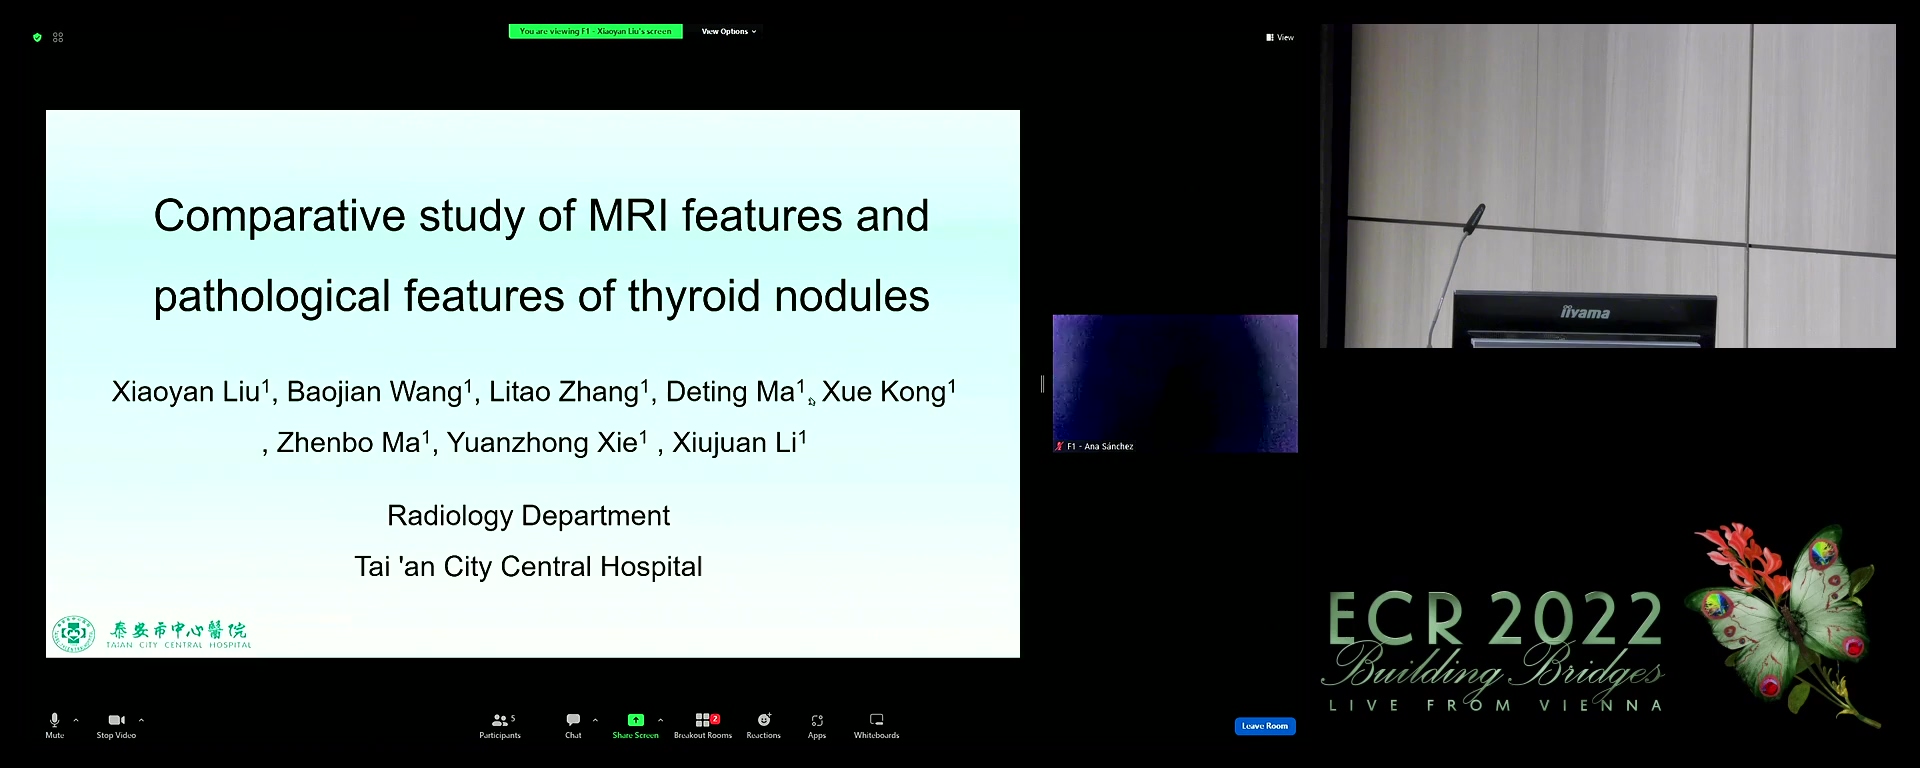 Comparative study of MRI features and pathological features of thyroid nodules